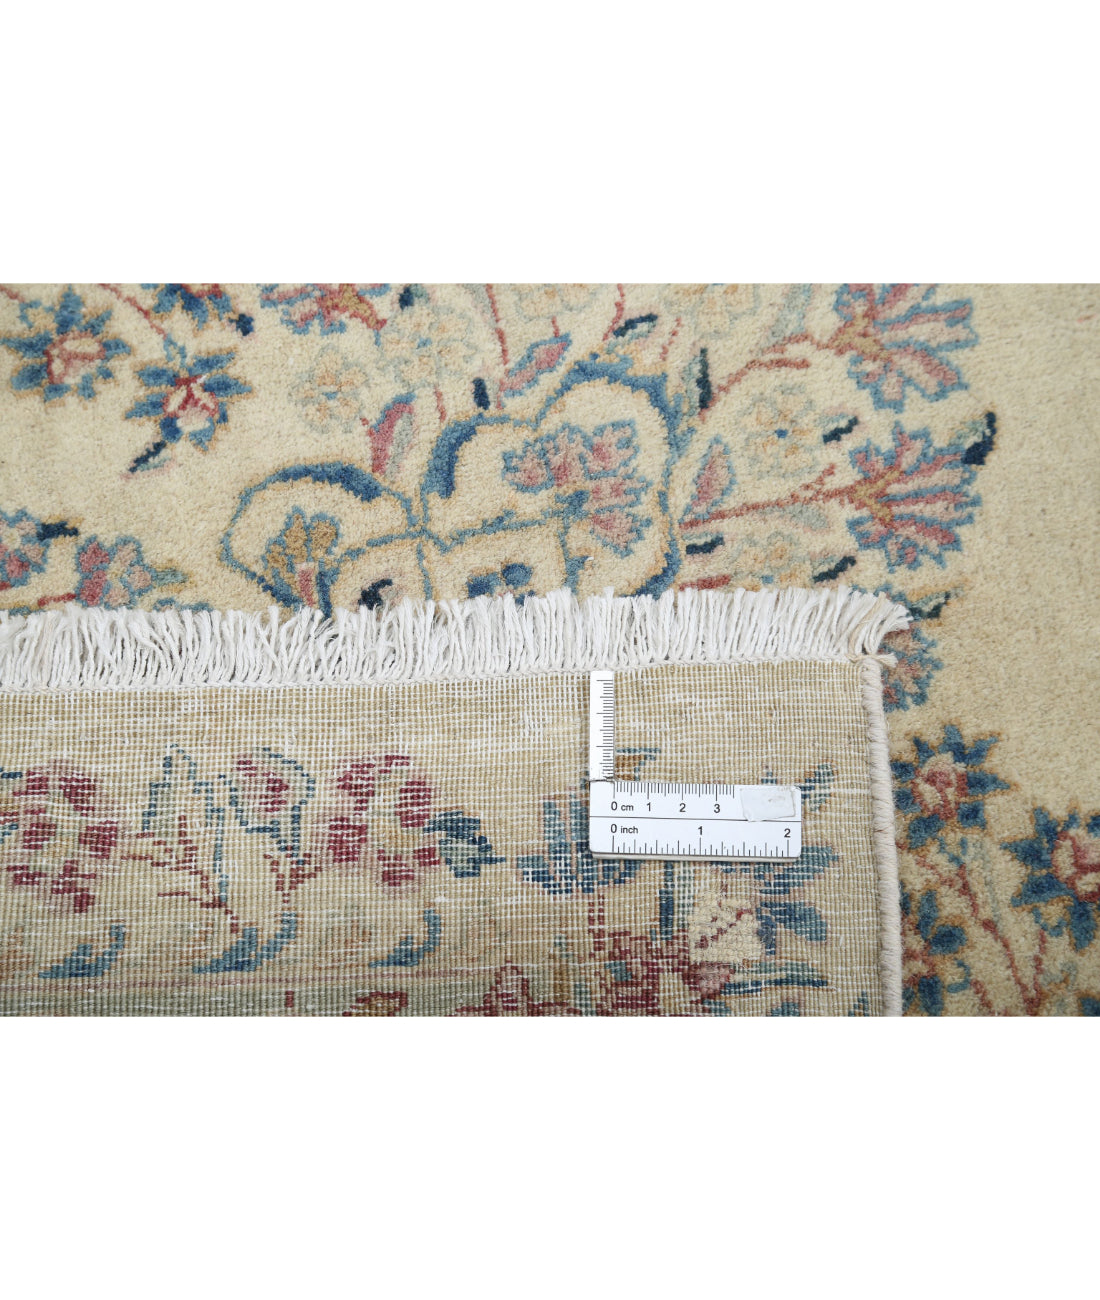 Hand Knotted Vintage Persian Kerman Wool Rug - 10'8'' x 16'9'' 10'8'' x 16'9'' (320 X 503) / Ivory / Blue